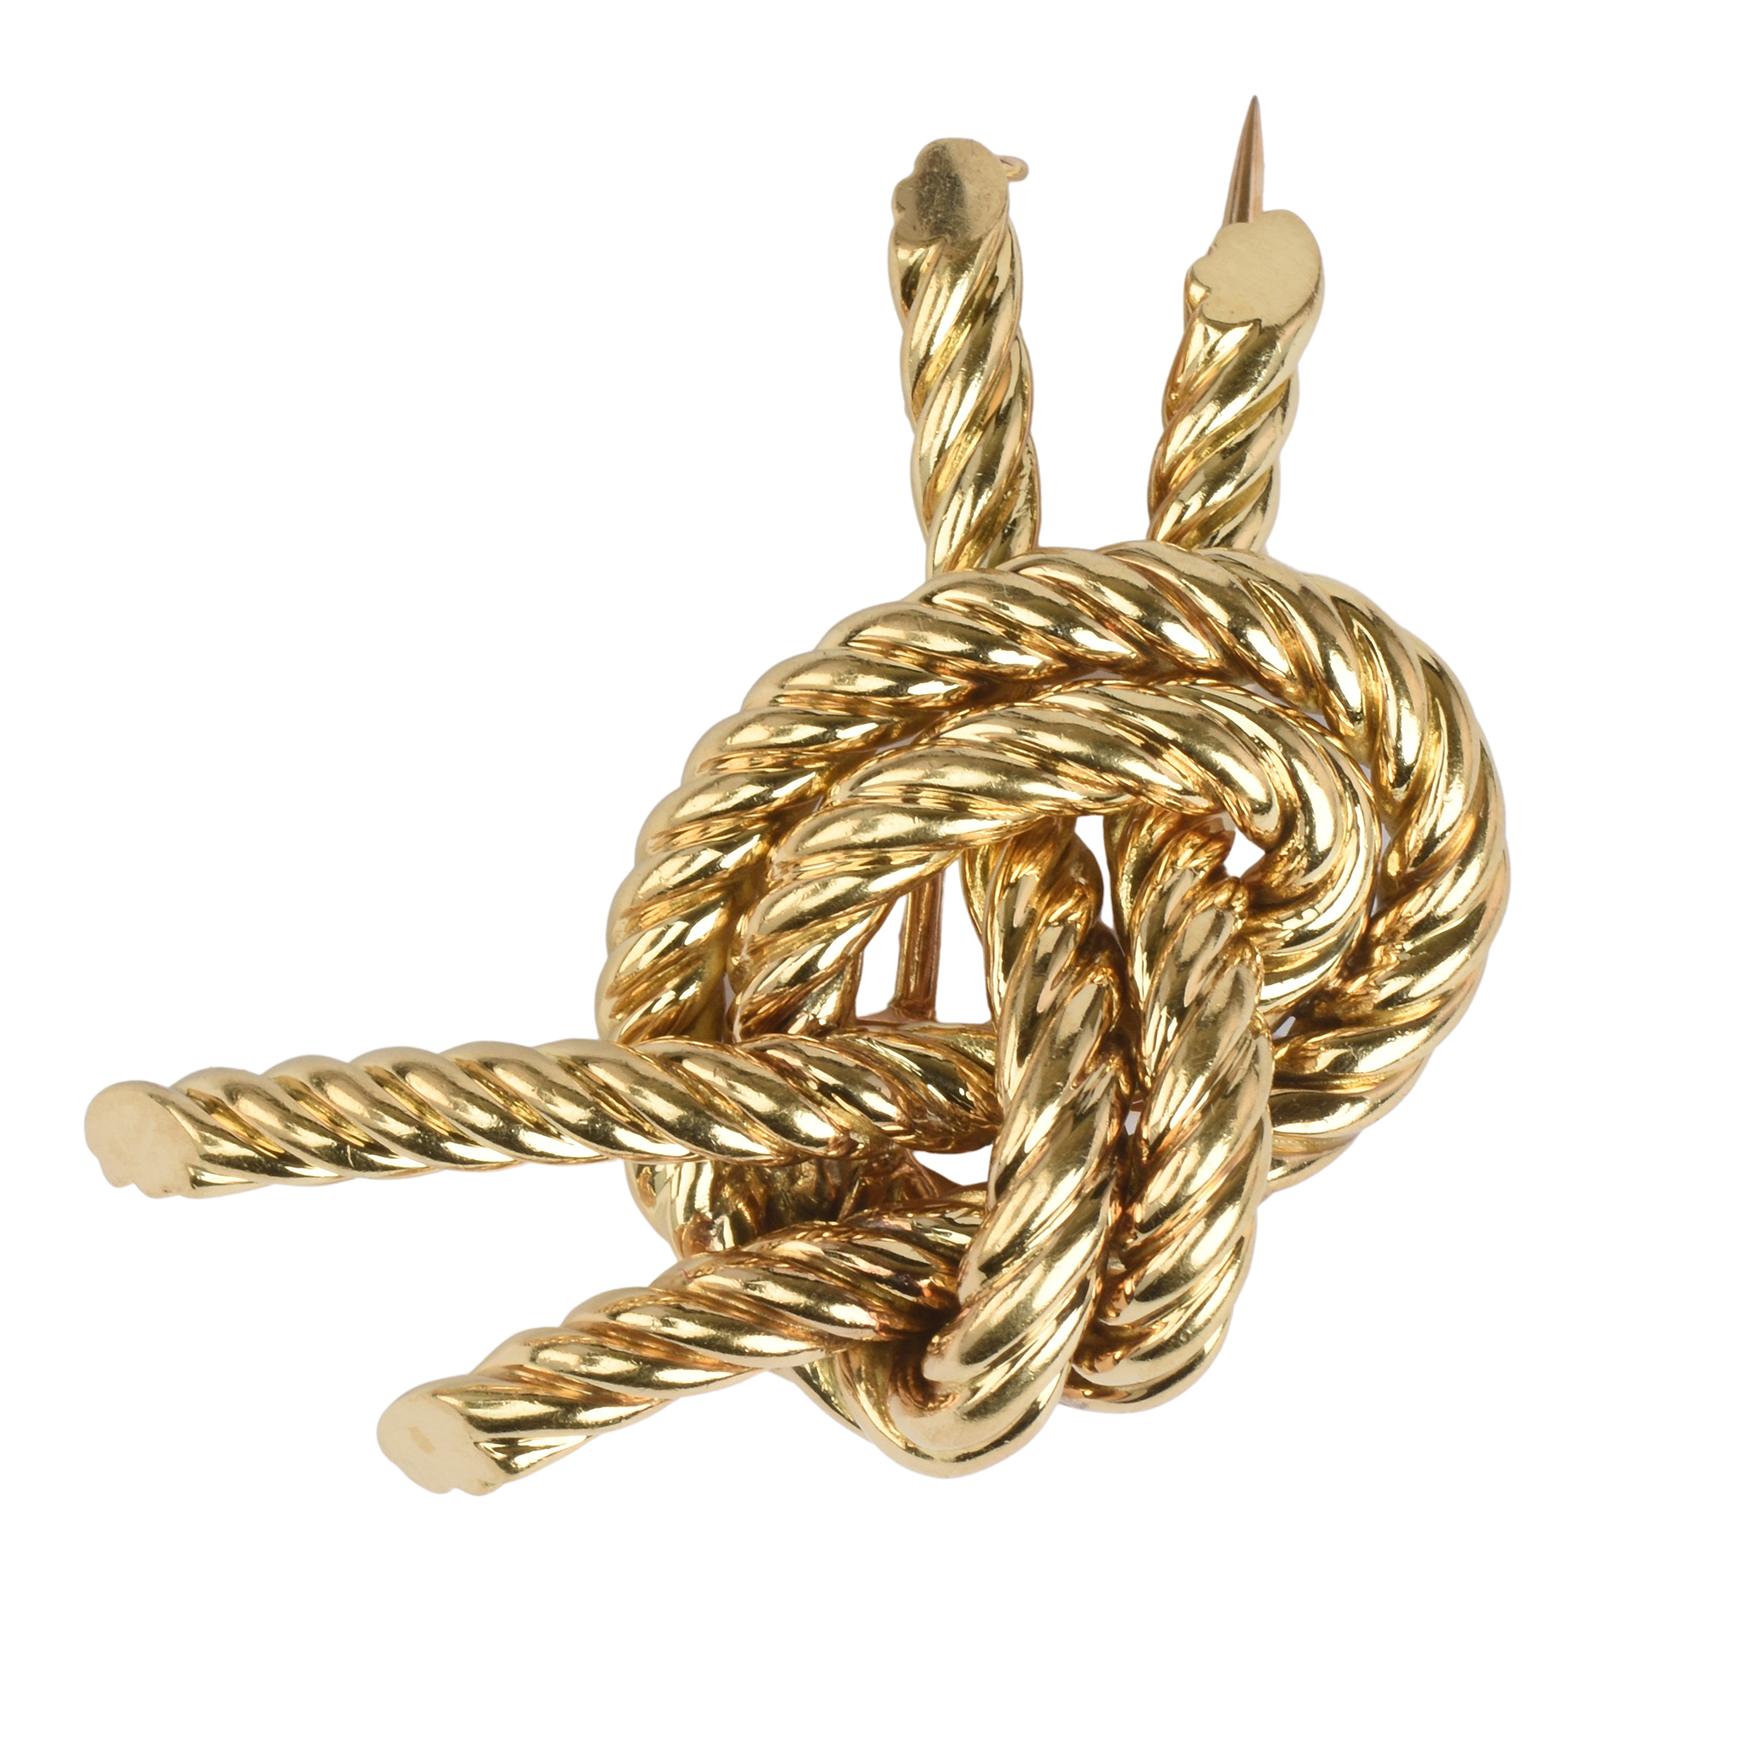 A vintage 18k yellow gold Hermès tied gold knot rope design brooch by Georges L'Enfant.

Made in France, Paris, Circa 1960’s.

French marks 18k,  Marked Hermes Paris